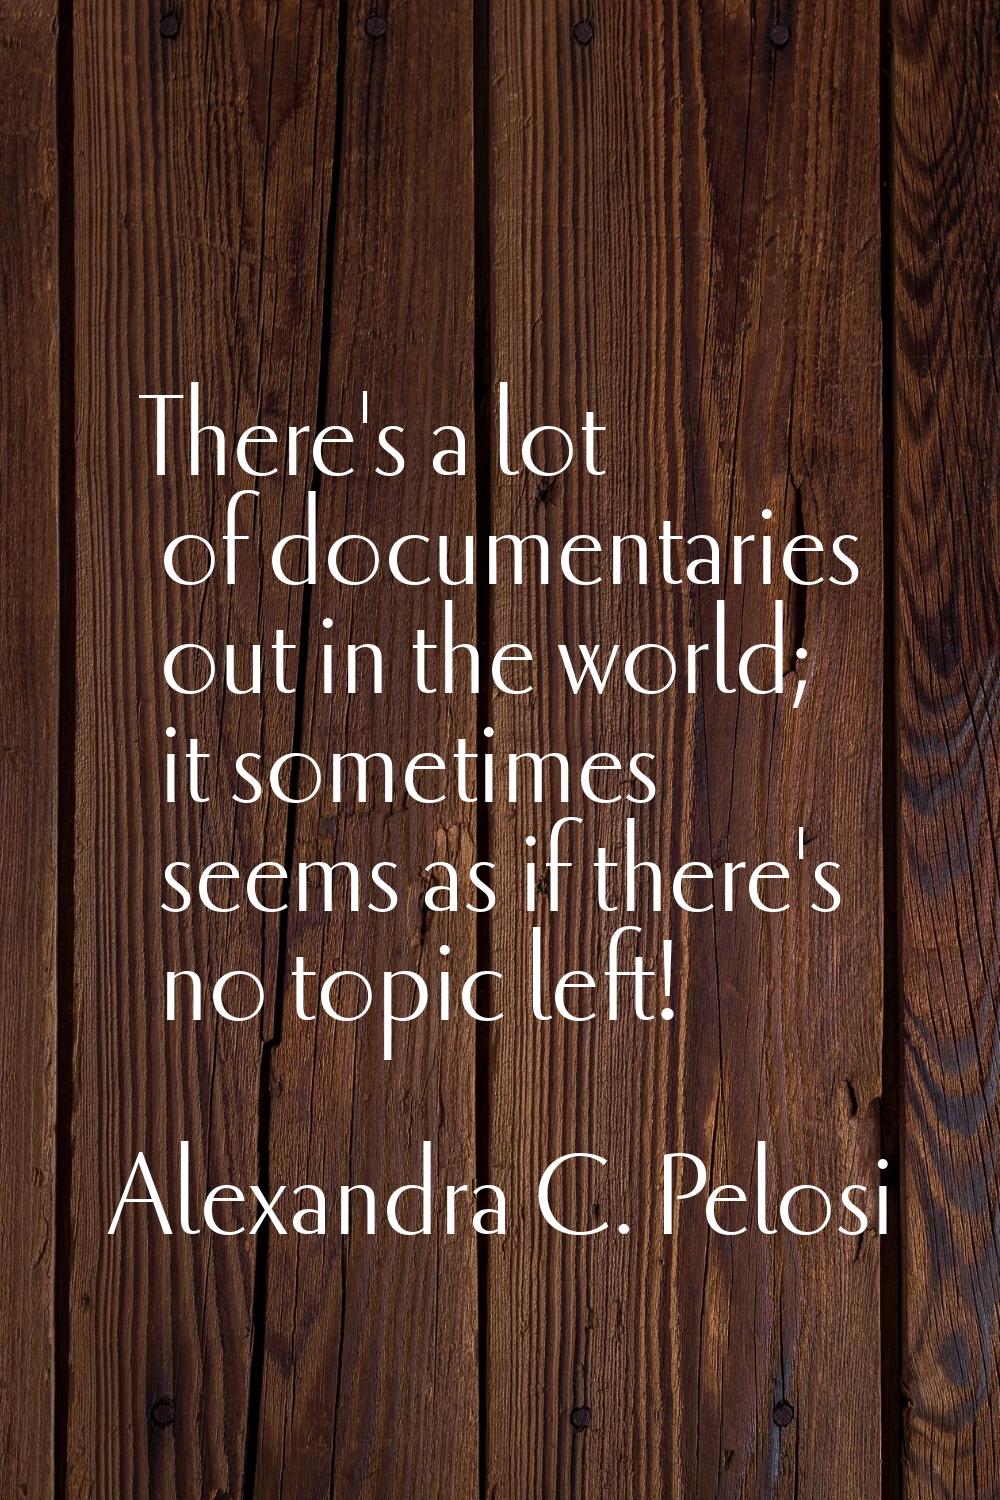 There's a lot of documentaries out in the world; it sometimes seems as if there's no topic left!